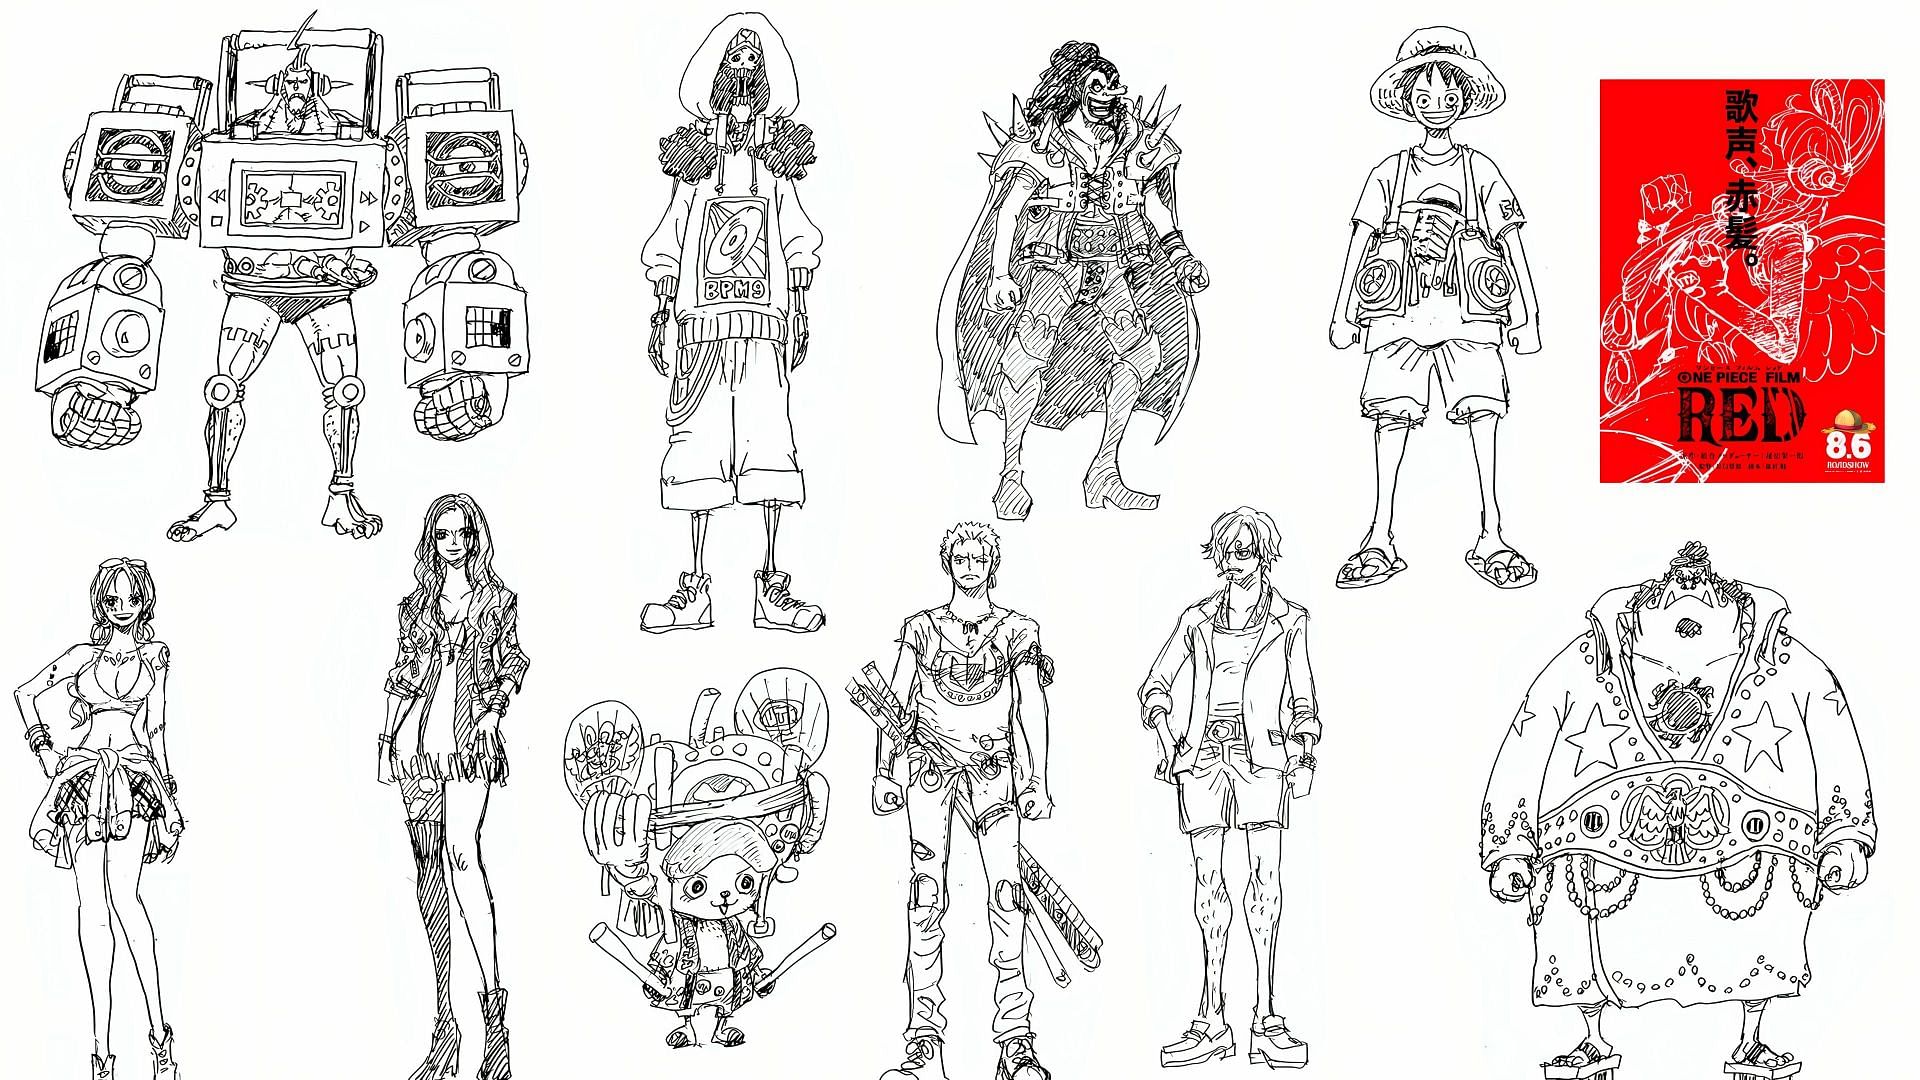 Character design of the Straw Hat Pirates for One Piece Film: Red (Image Via Jump Comic Channel)